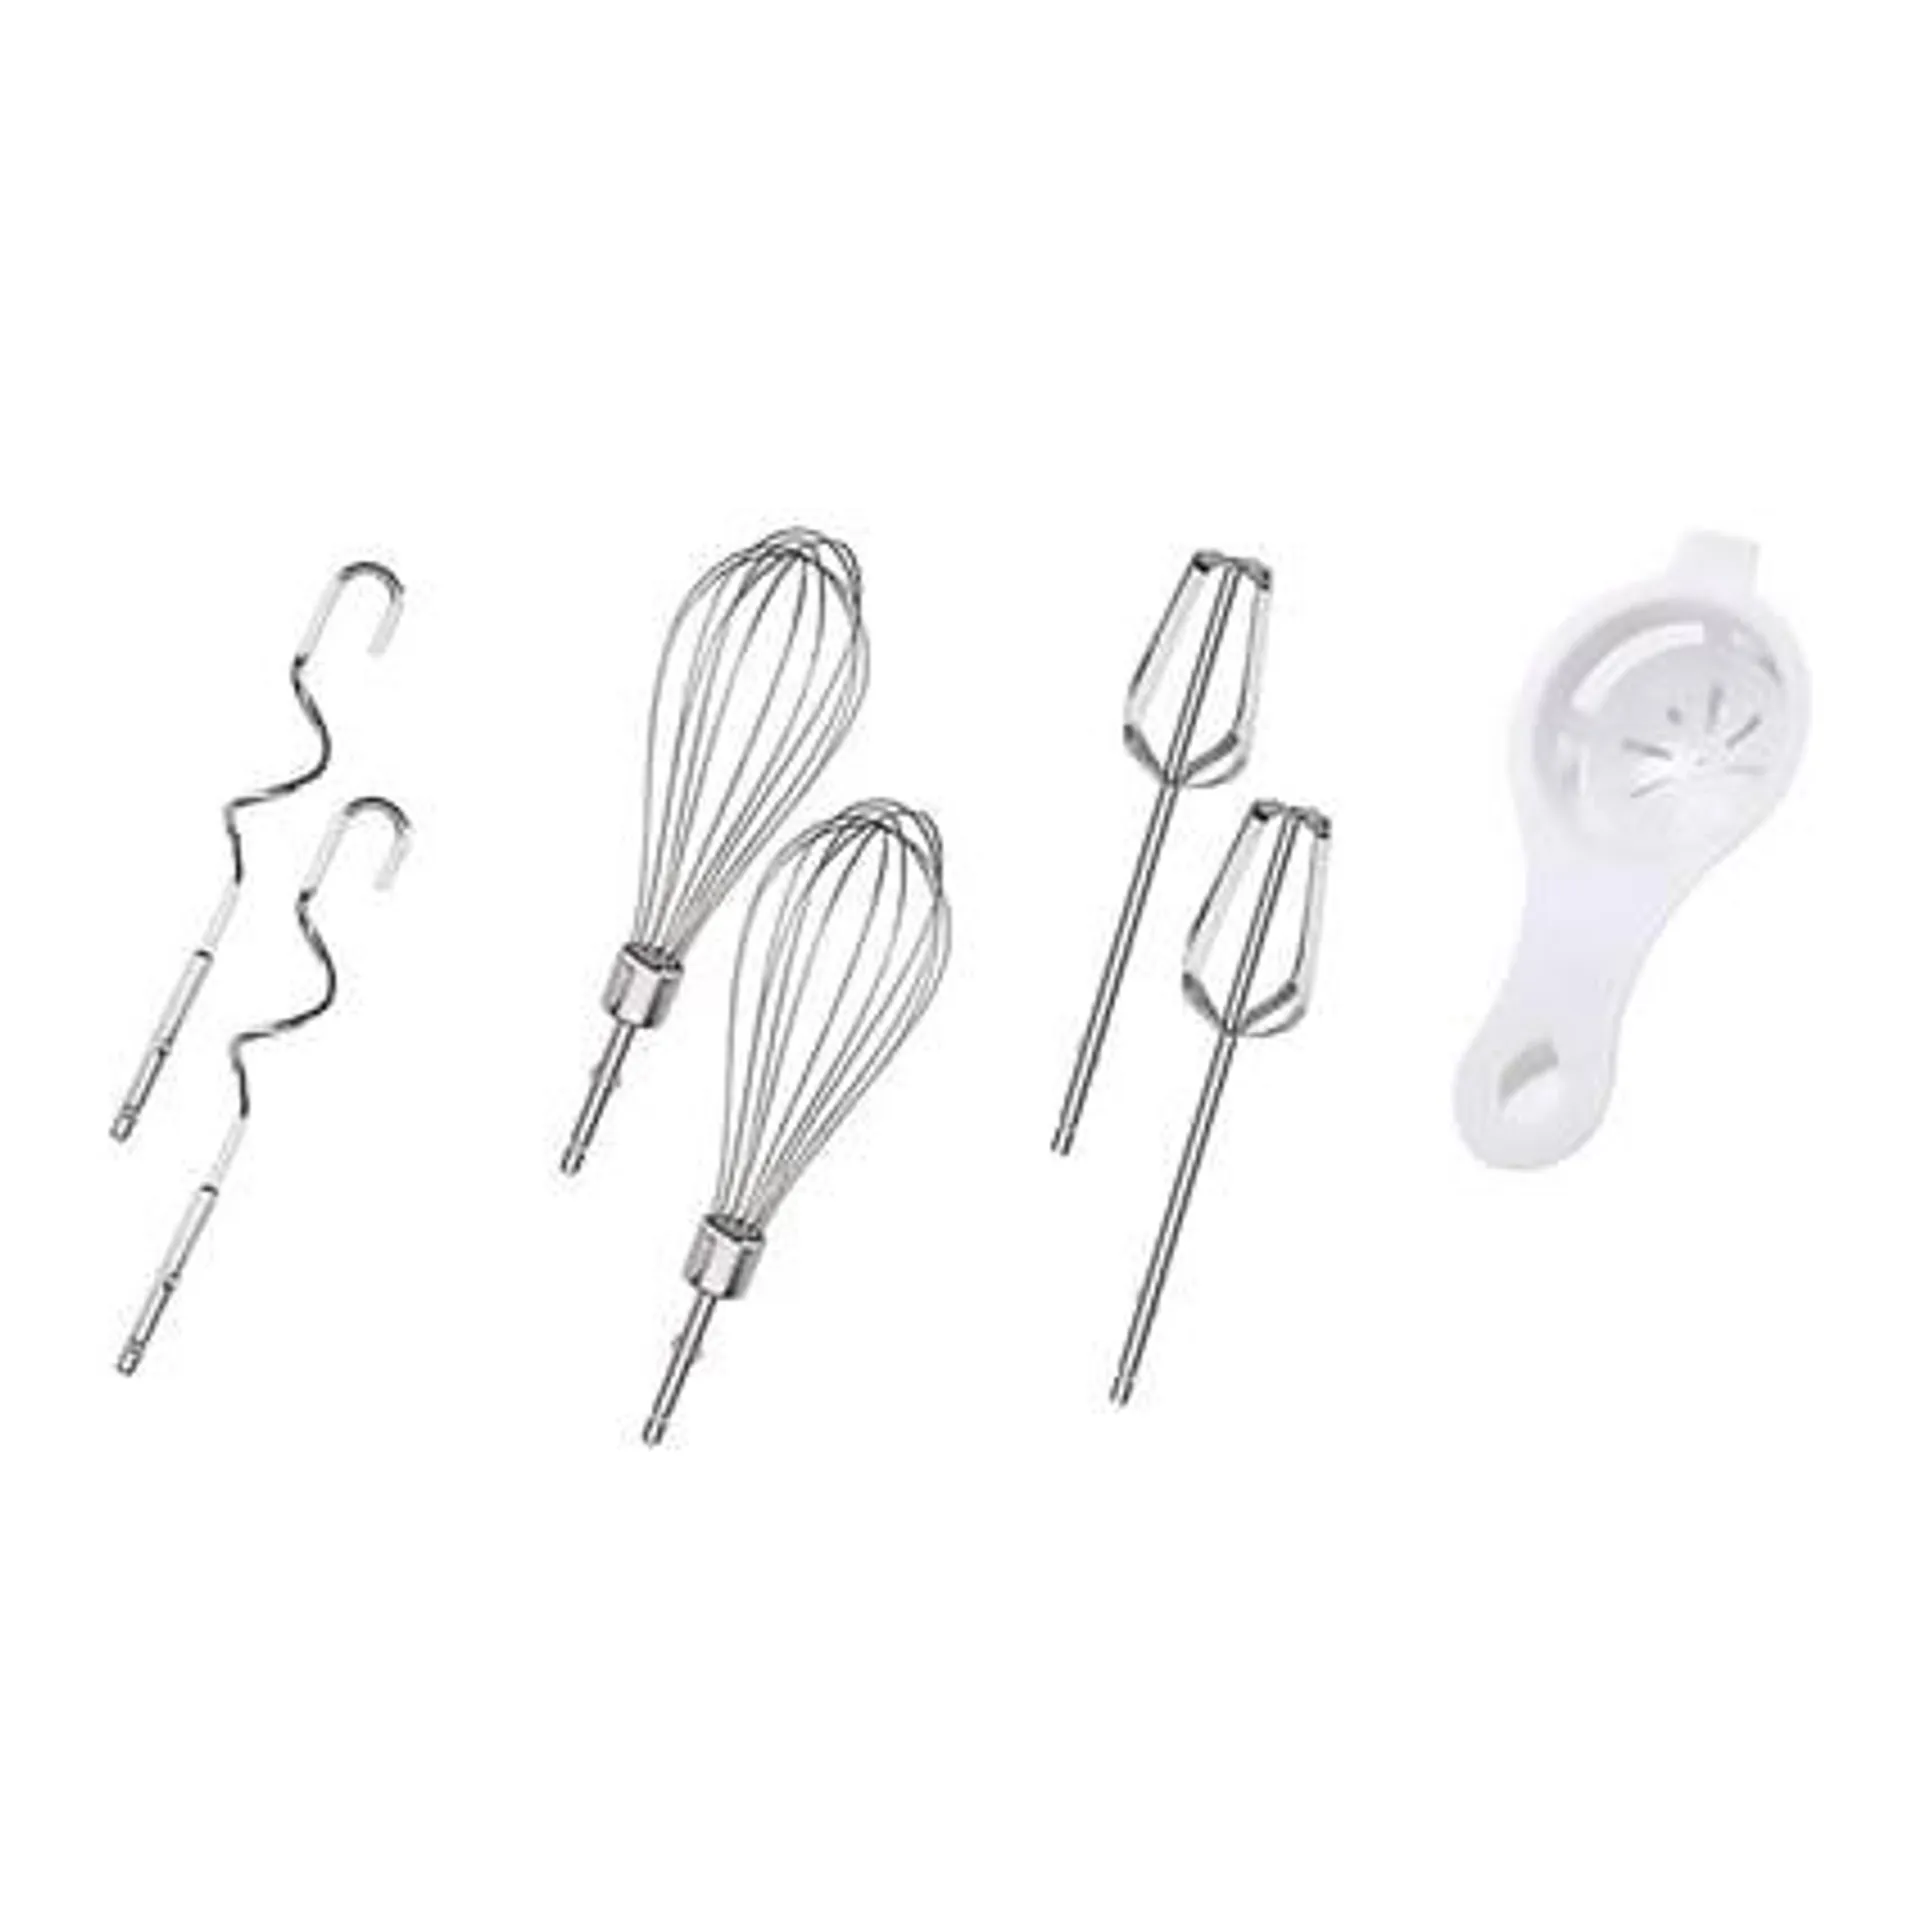 Re-Chargeable Hand Mixer with Stand